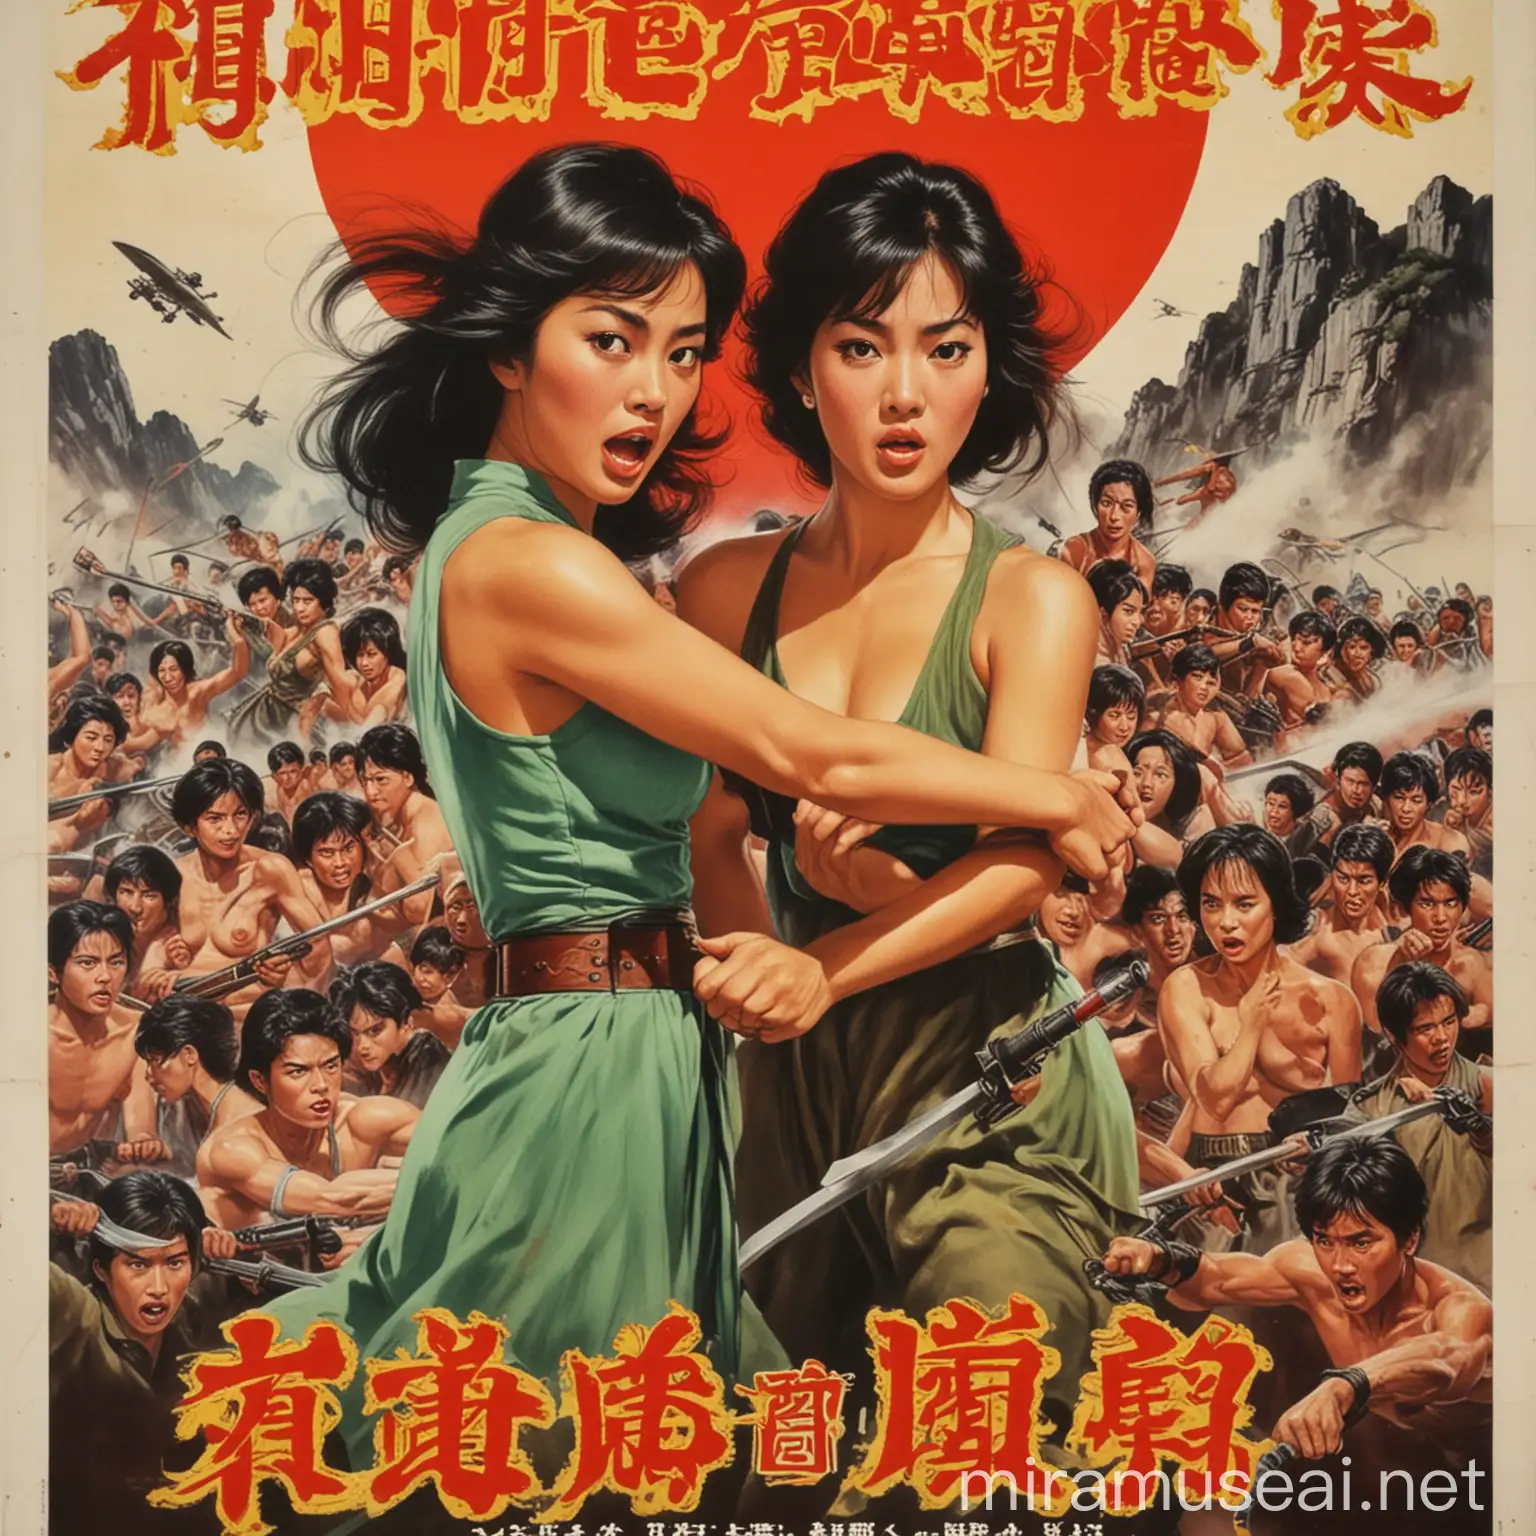 vintage hong kong movie poster. with fighting womens.